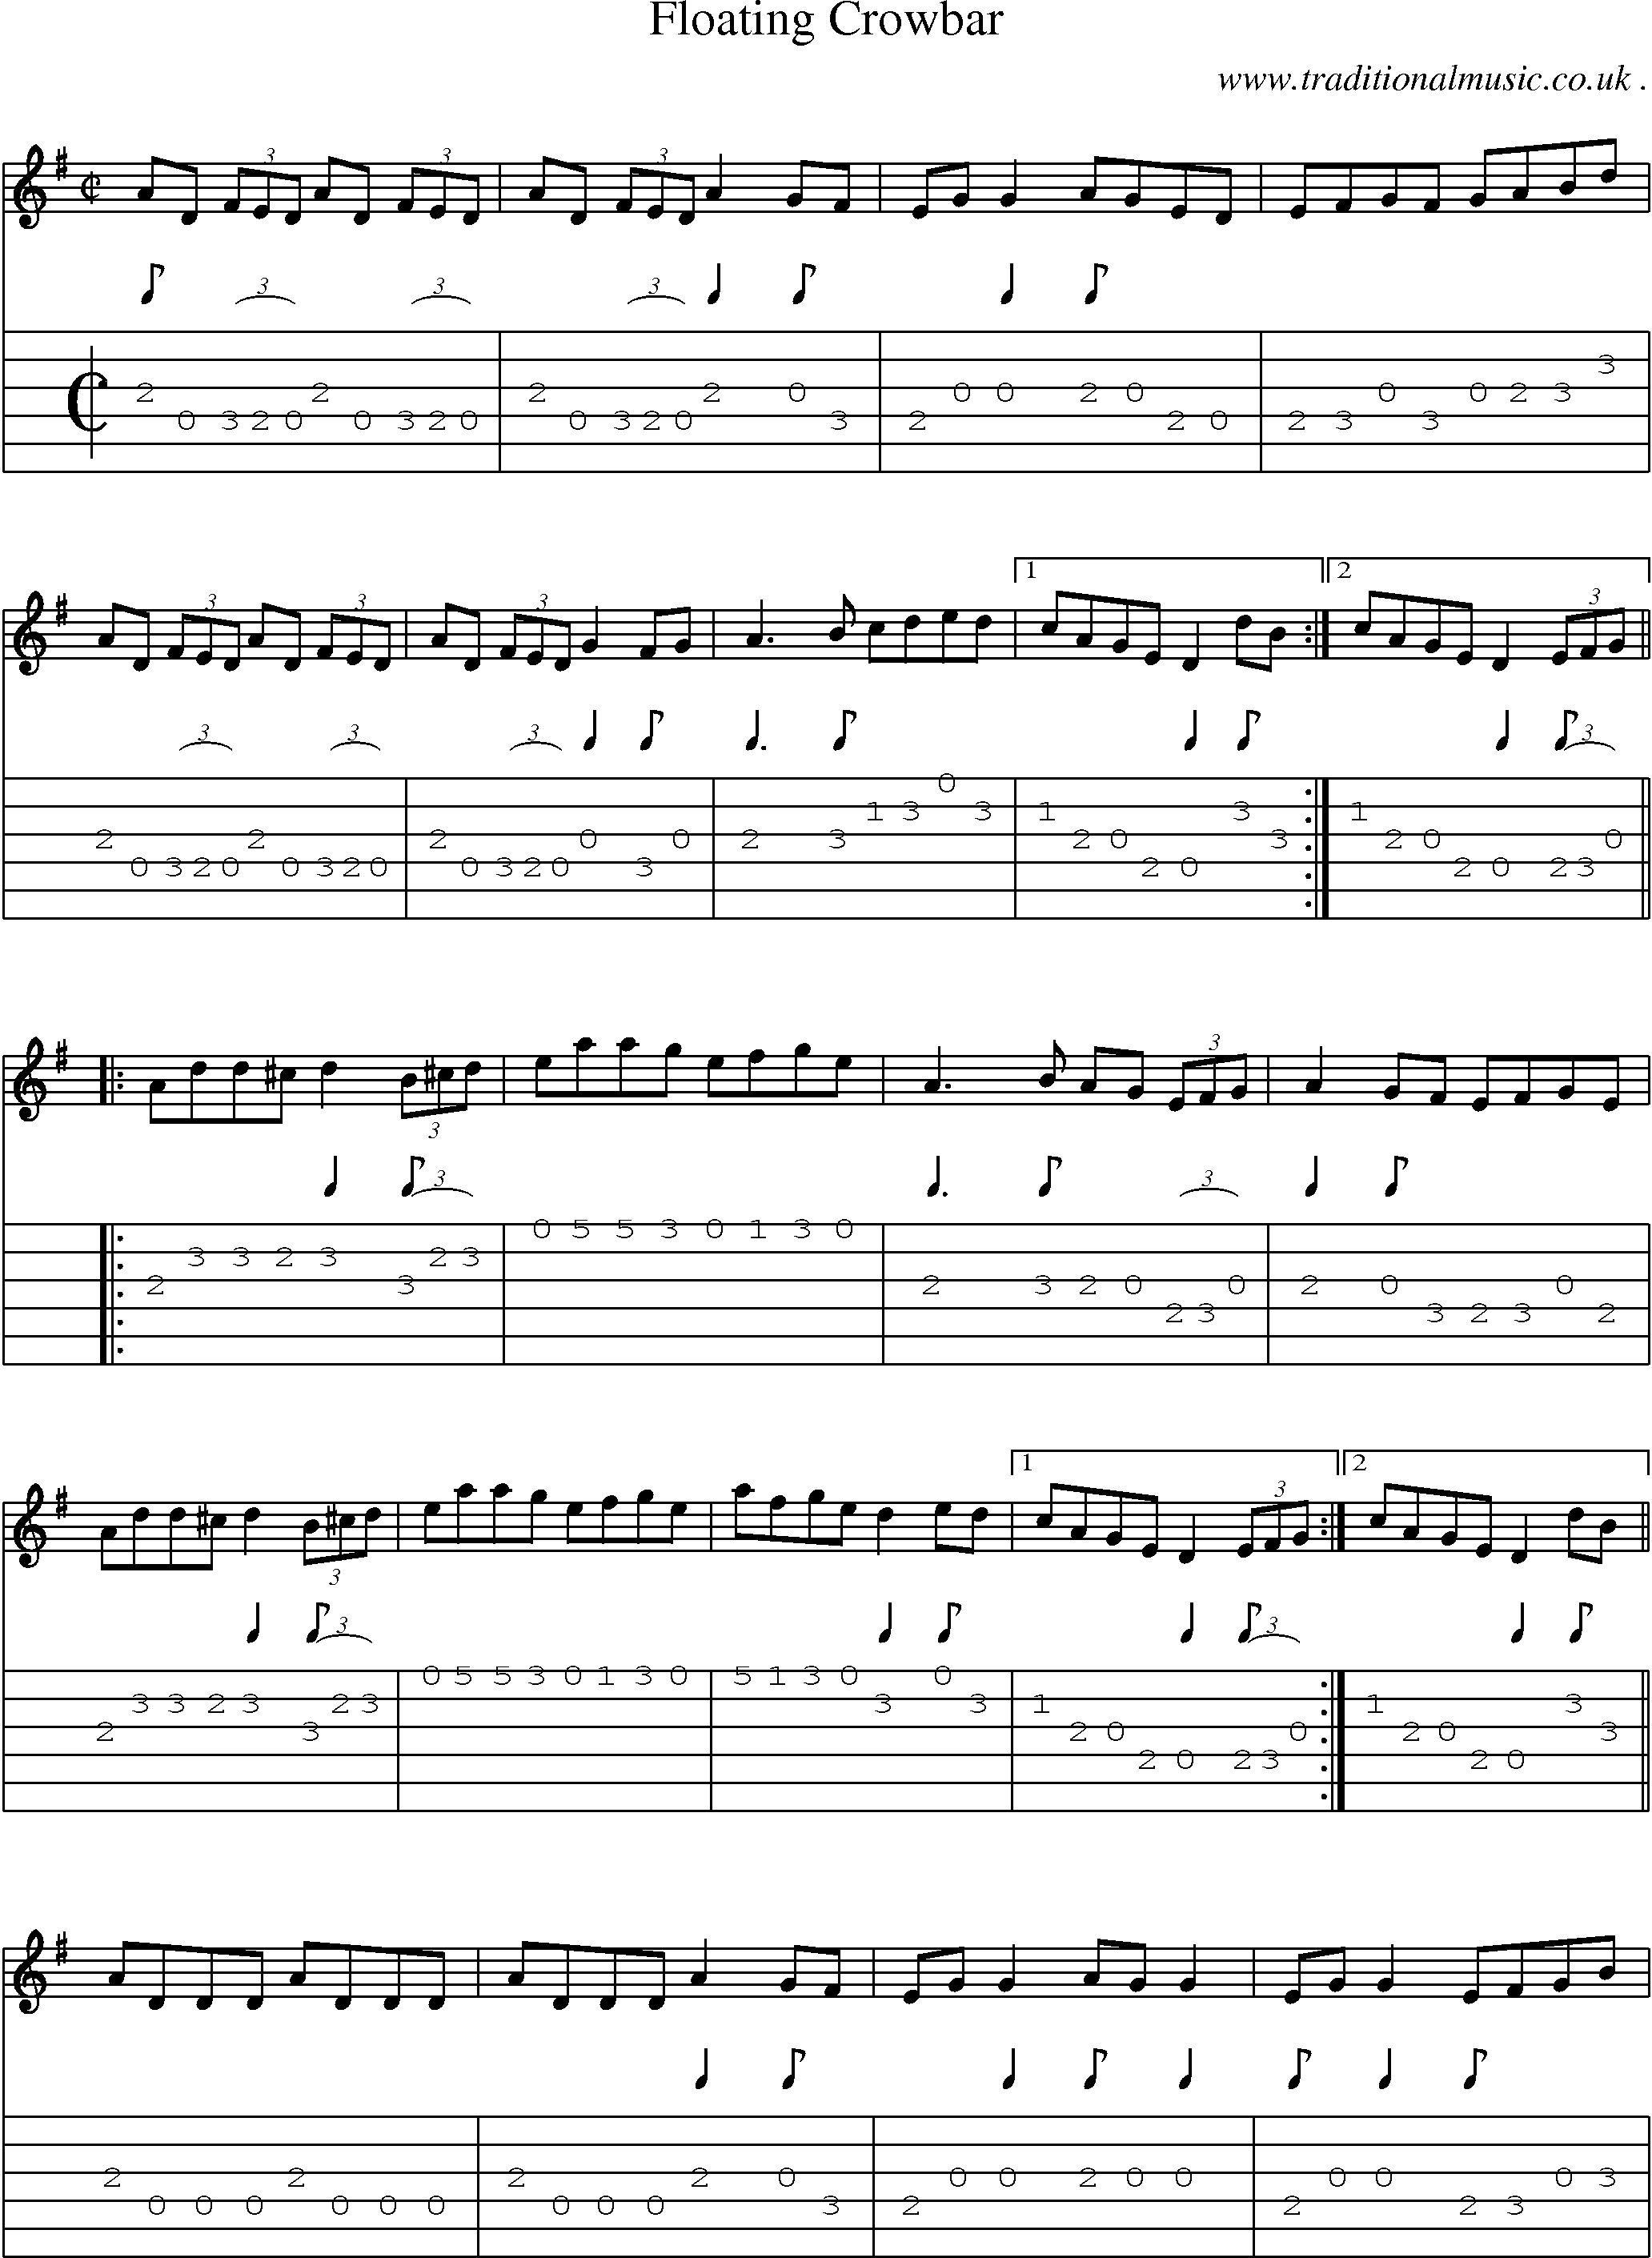 Sheet-Music and Guitar Tabs for Floating Crowbar